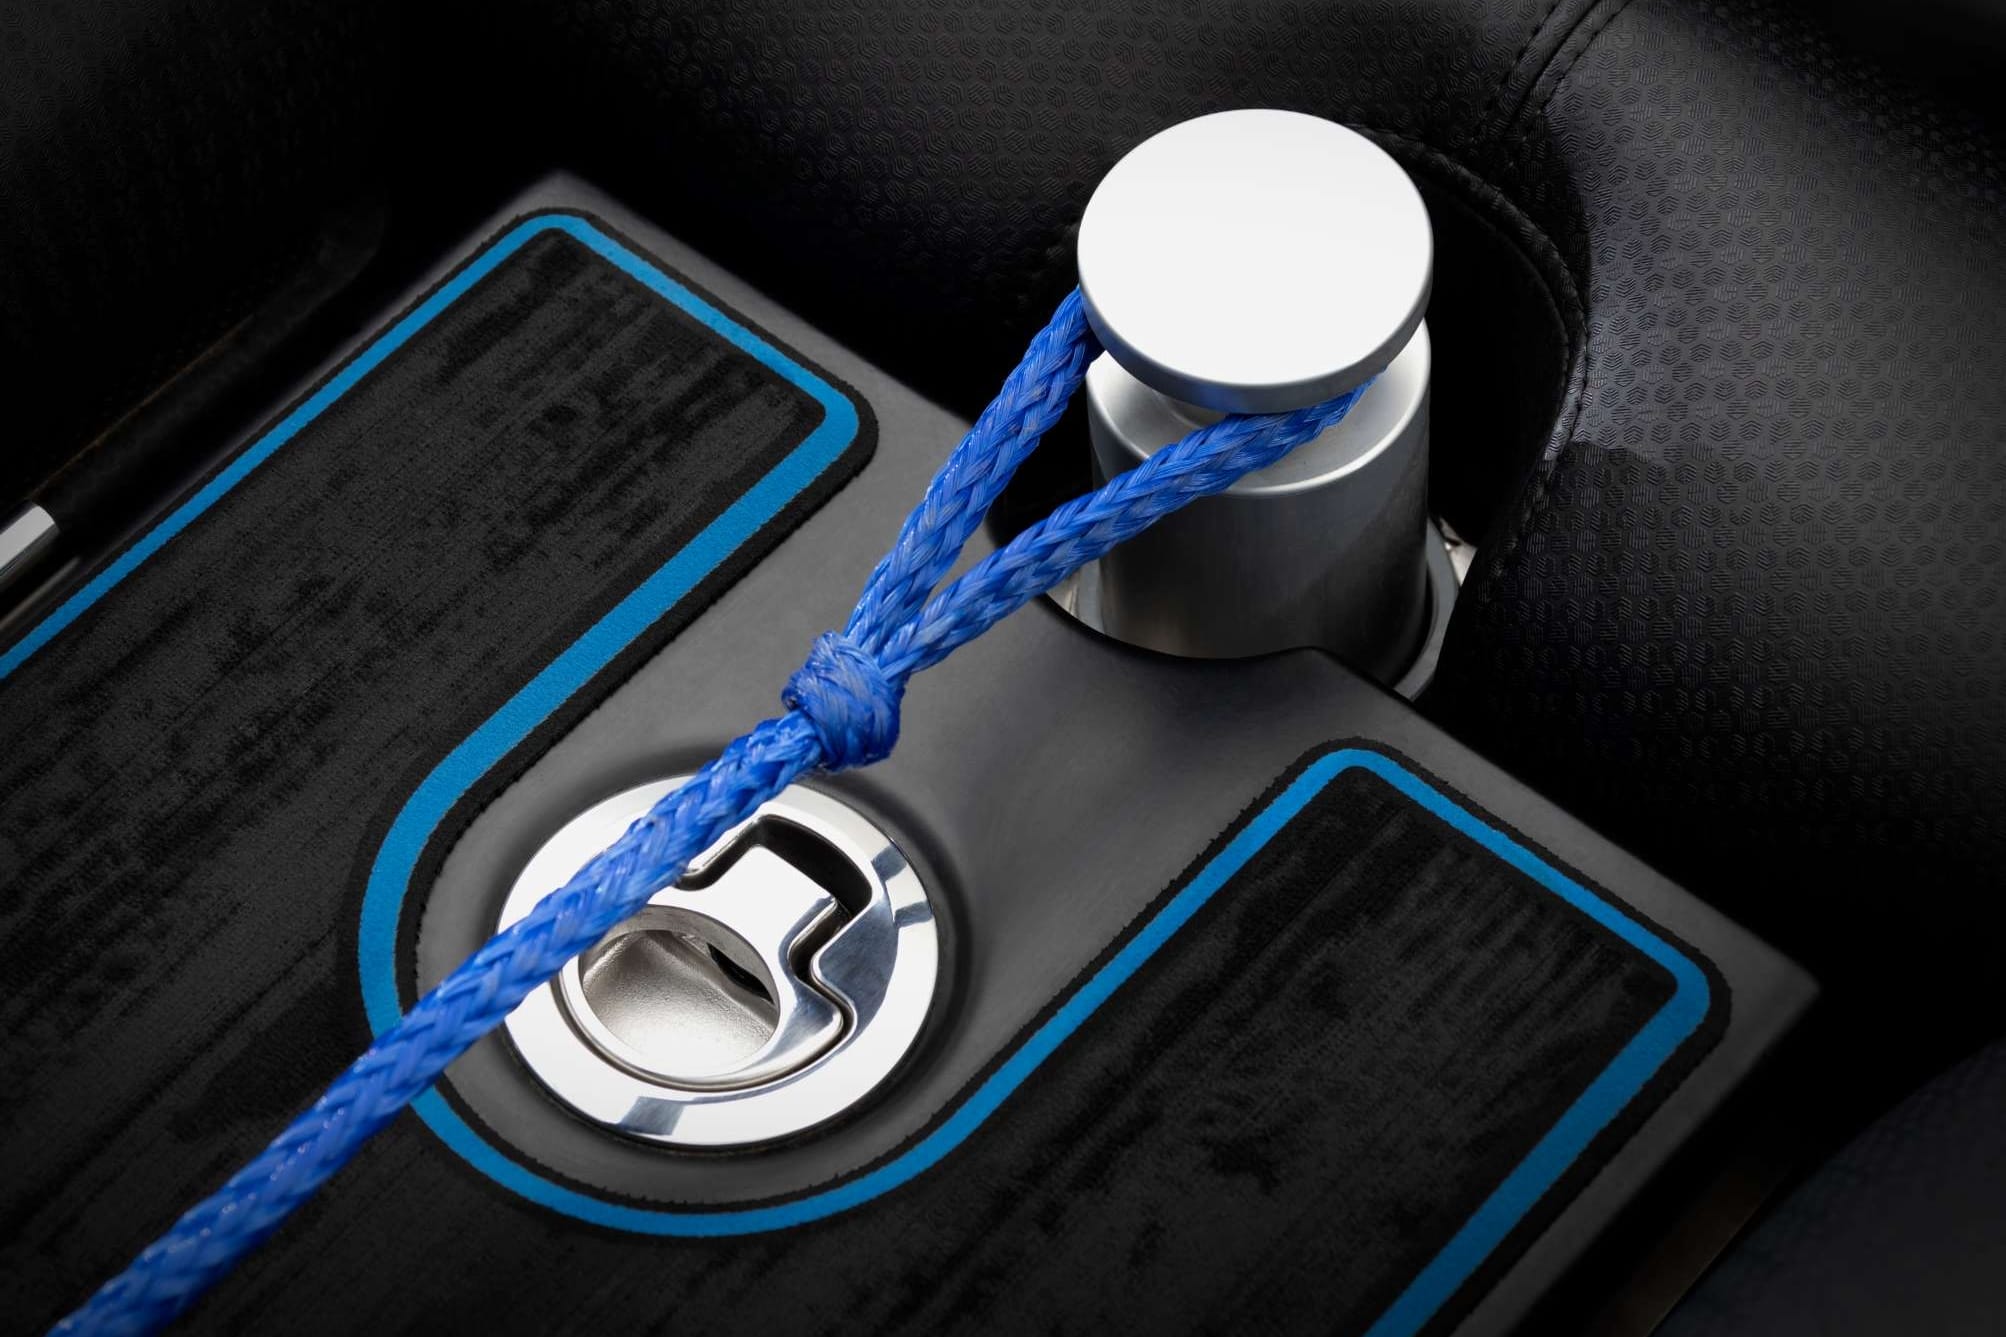 A rope is attached to a car's gear shifter, resembling wakesurf boat attachment.